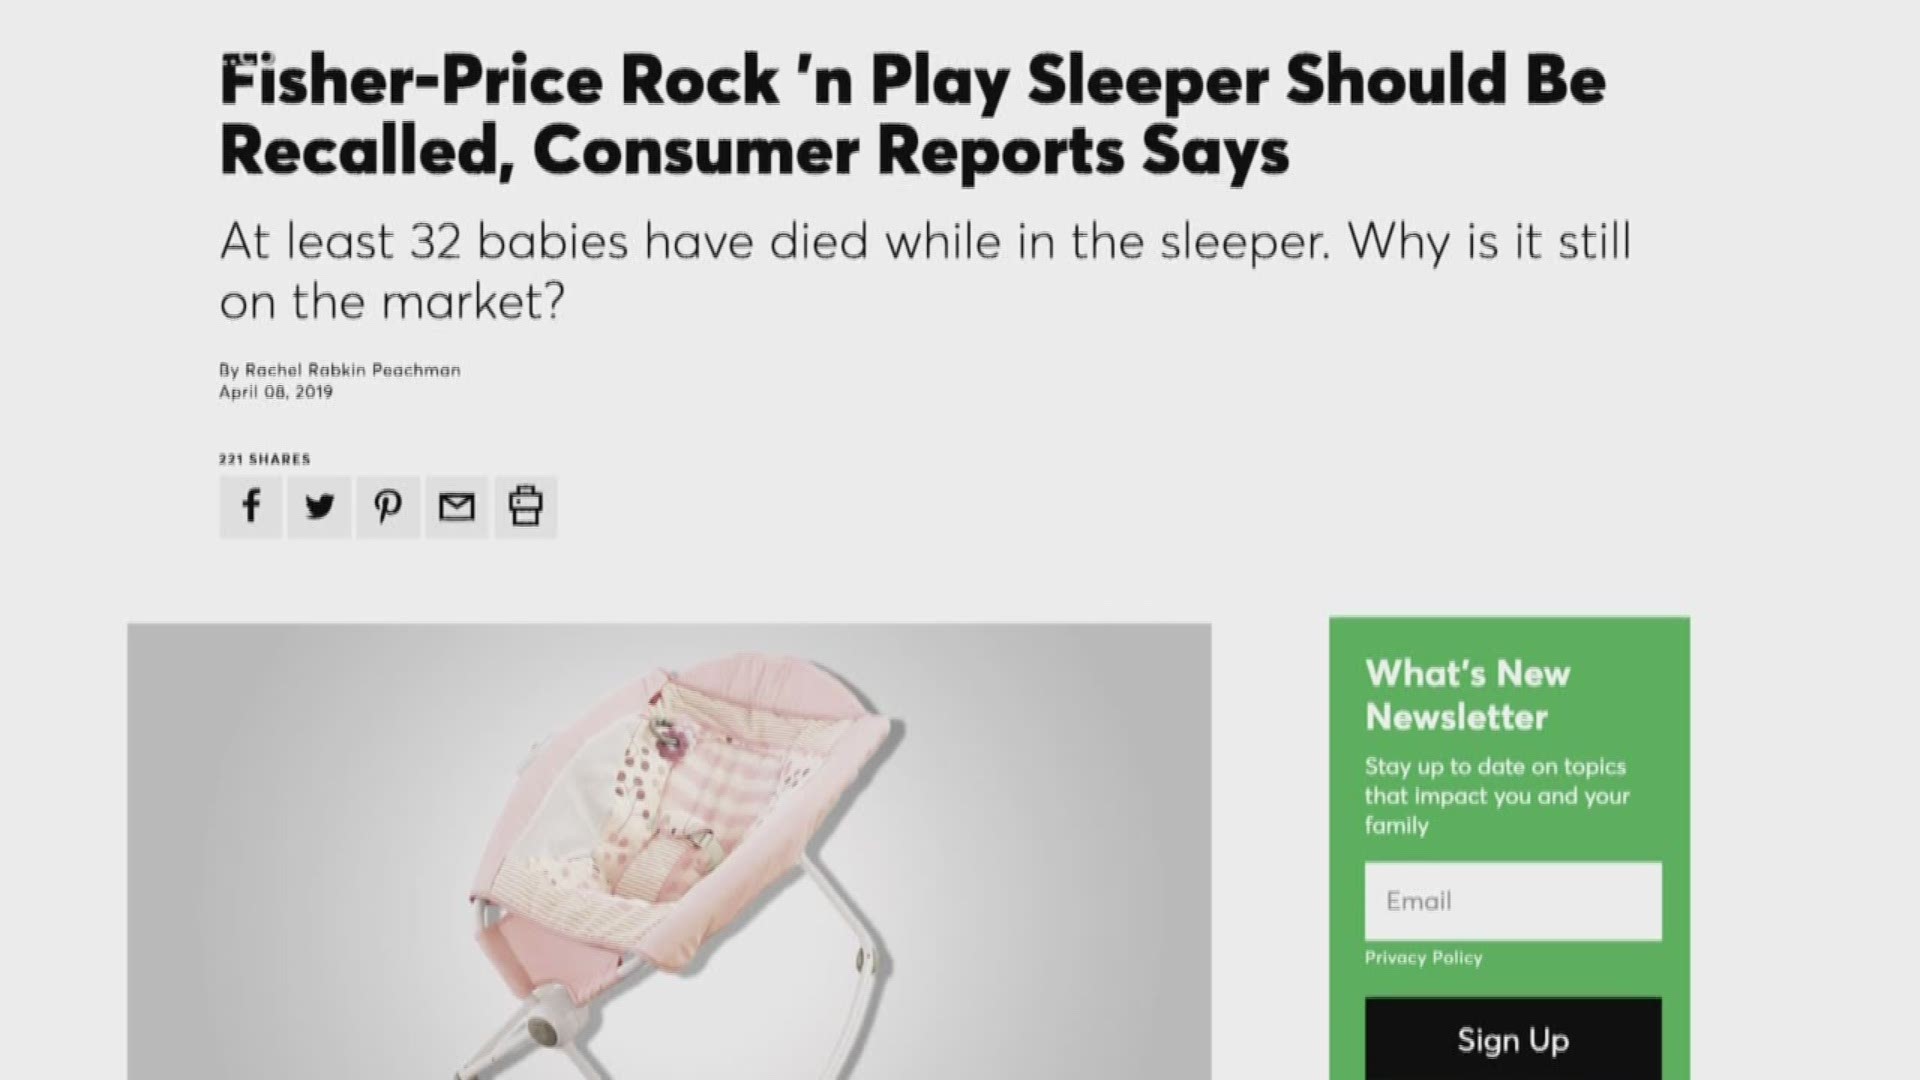 Multiple groups are calling for the sleeper to be recalled.